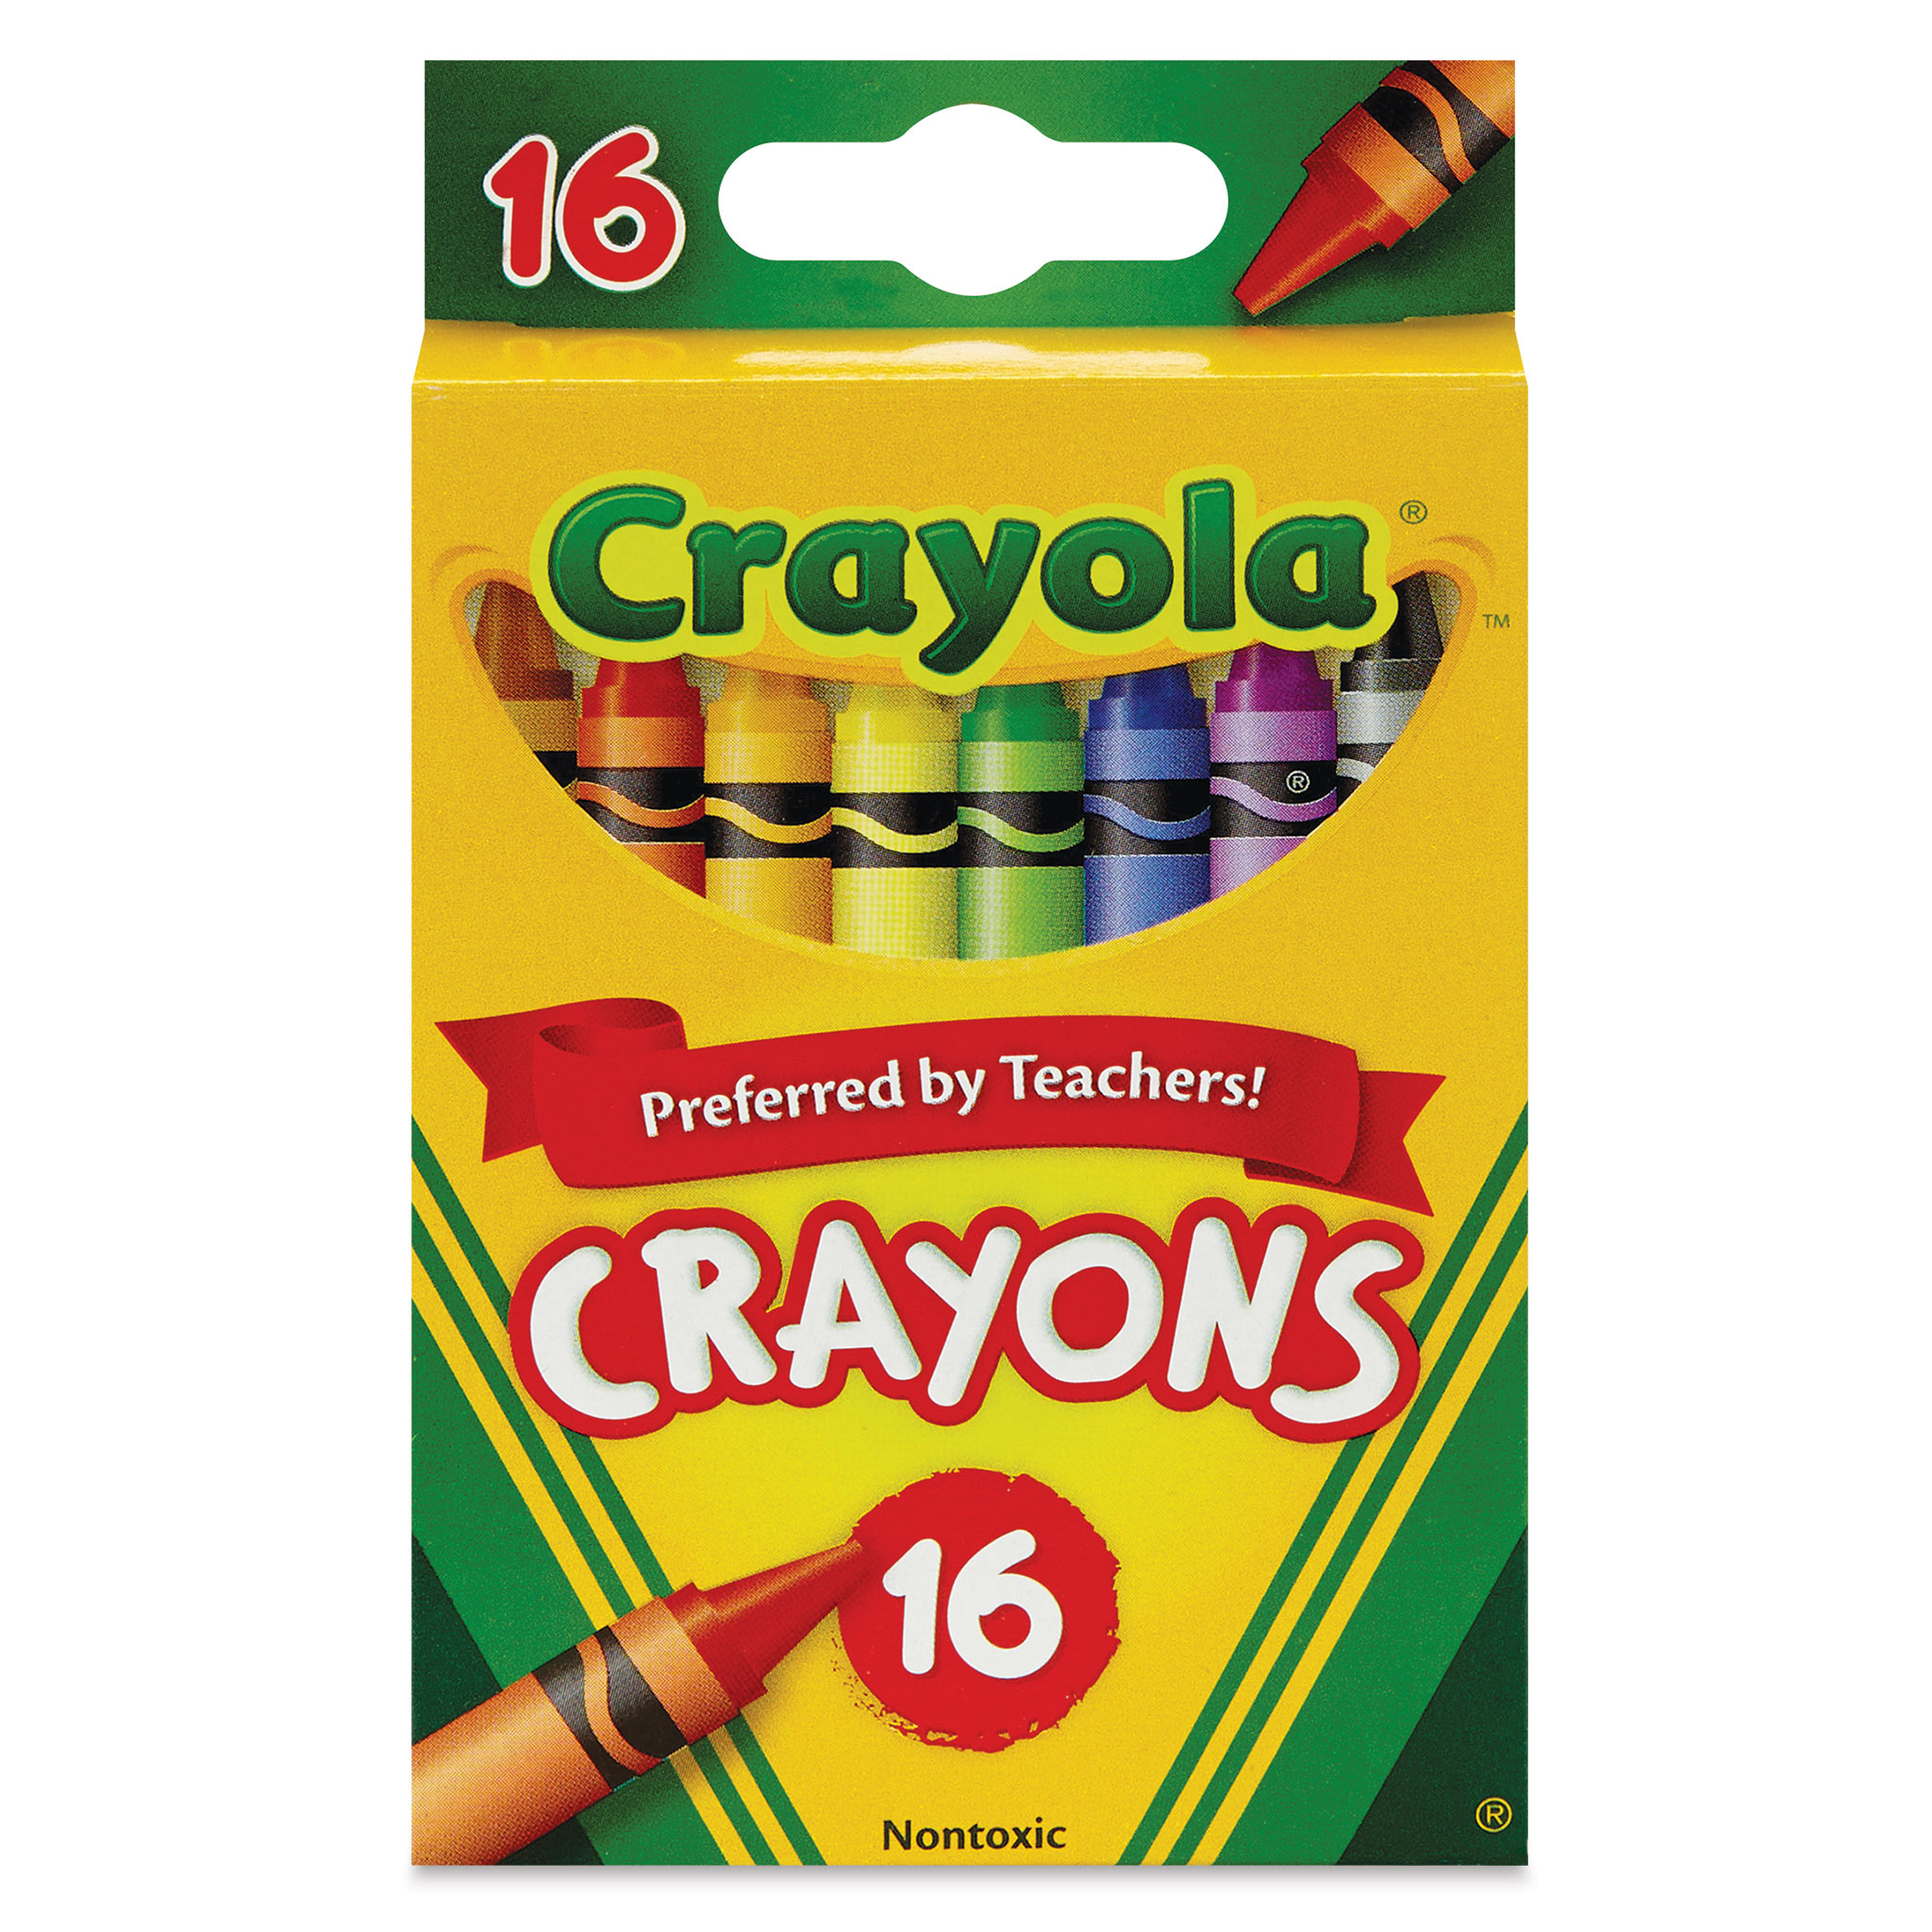 Crayola Oil Pastels, Assorted Colors, Set of 16 